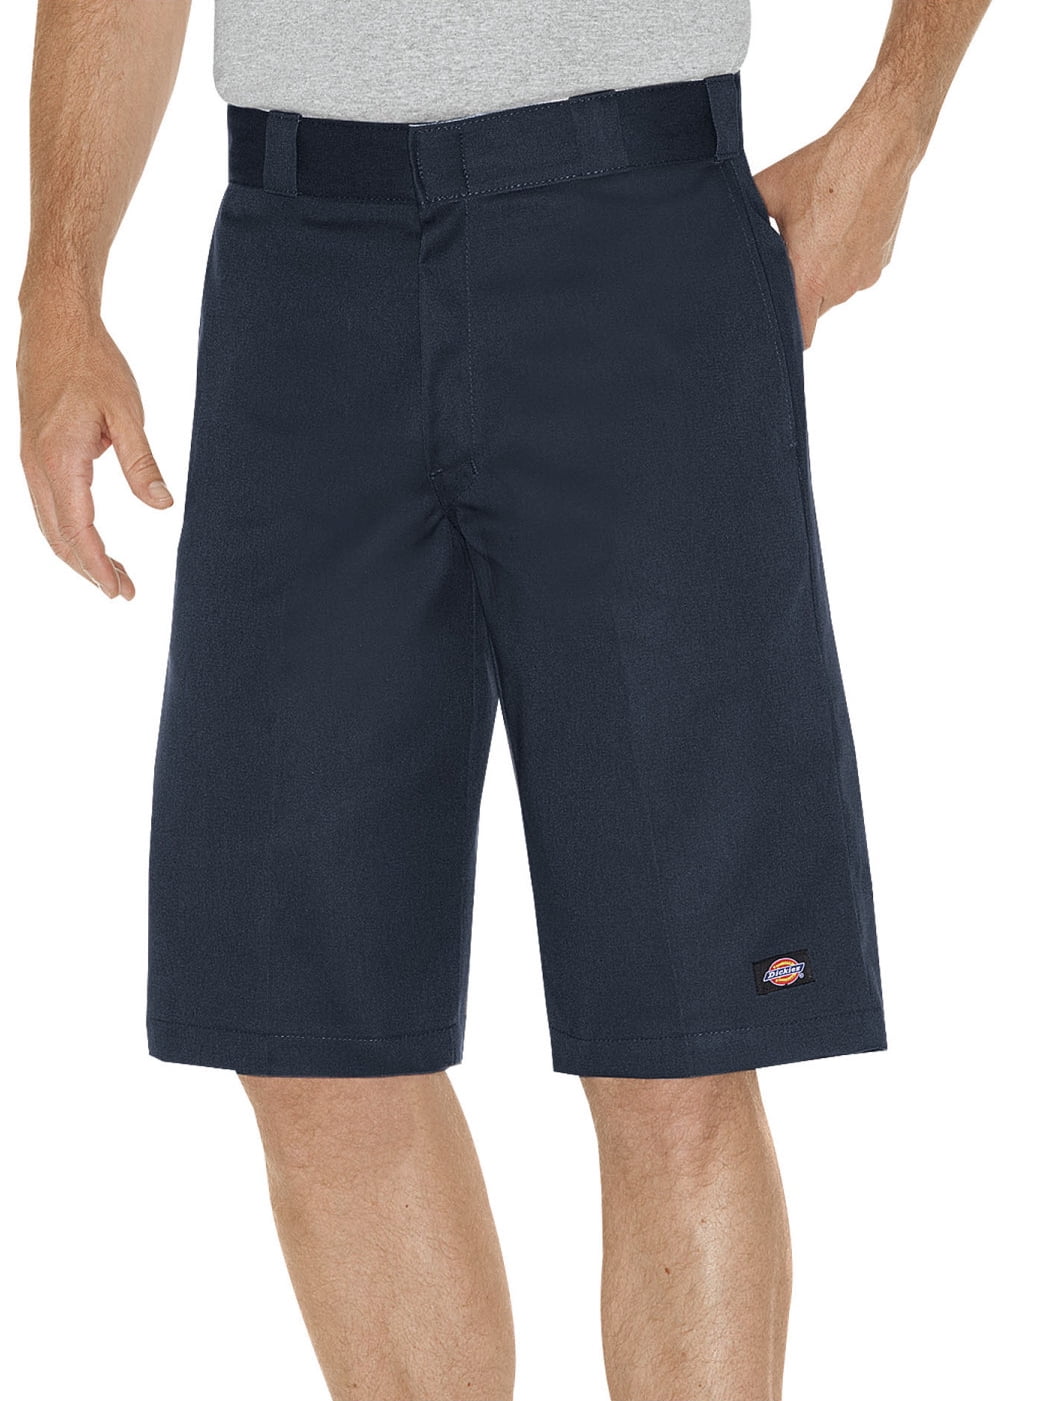 Dickies Mens 13 Inch Flex Relaxed Fit Multi-Pocket Work Short Shorts